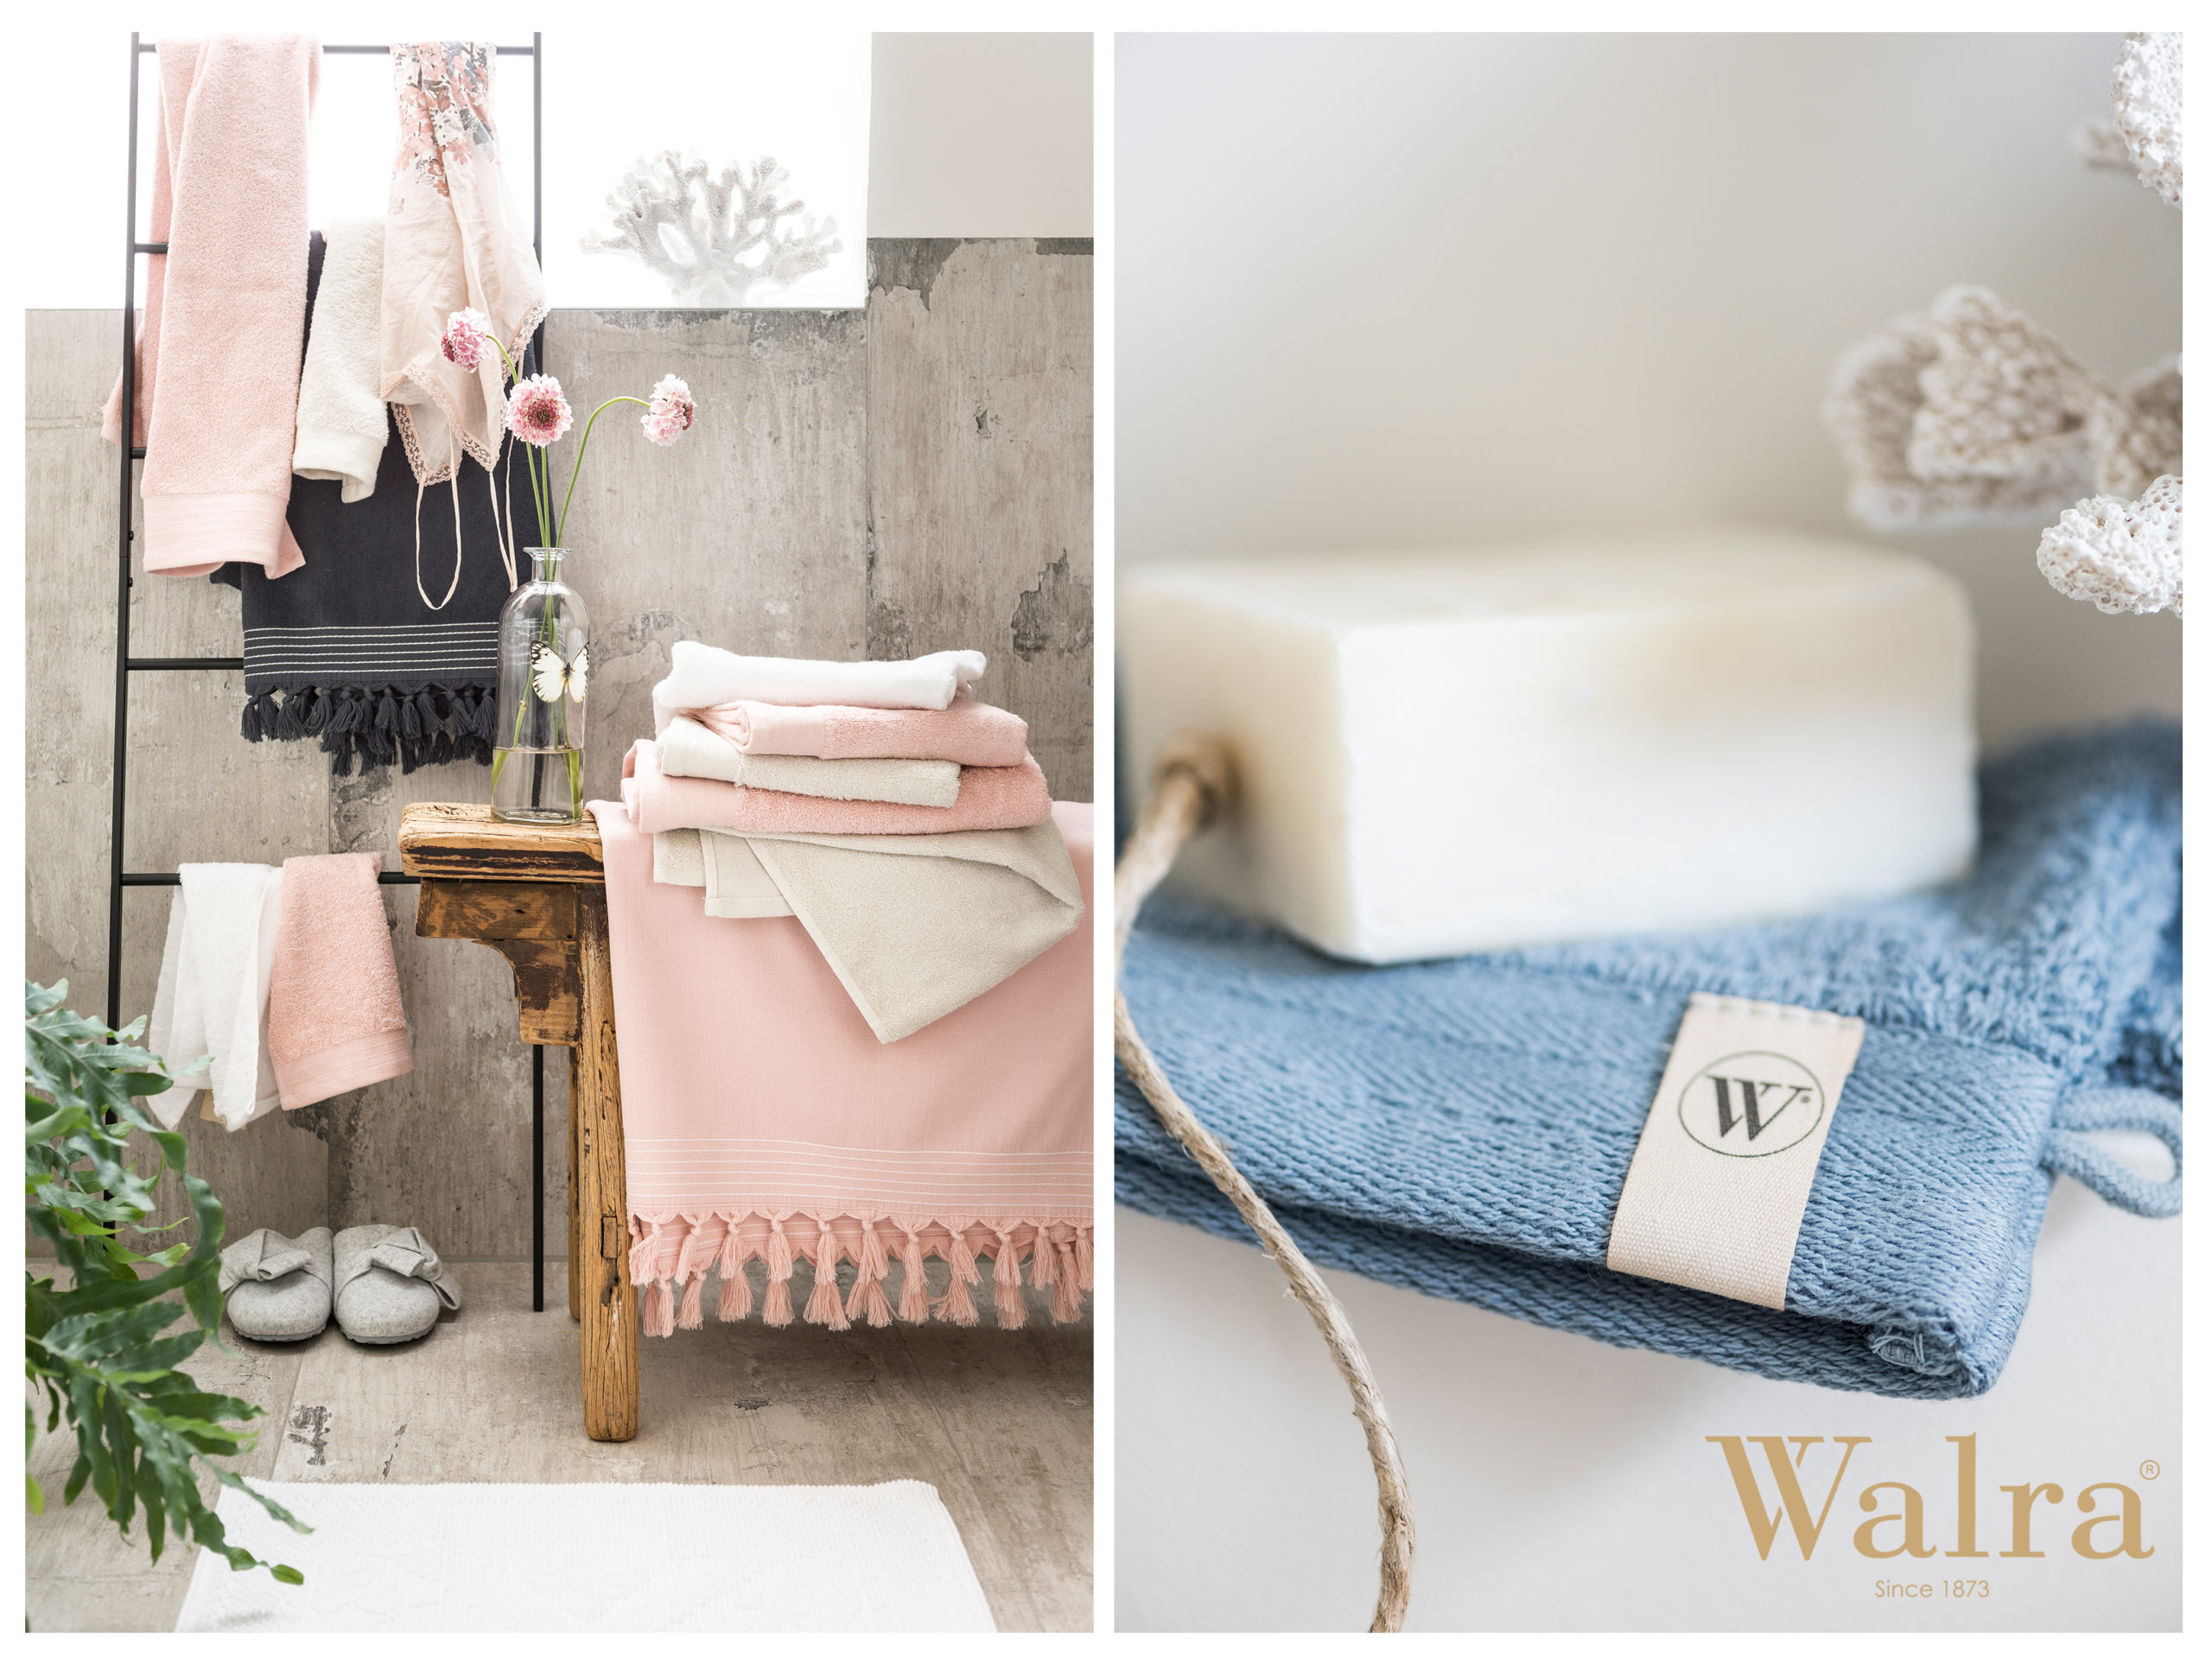 EMMA WORLDWIDE Launches European brand, Walra® in China this August